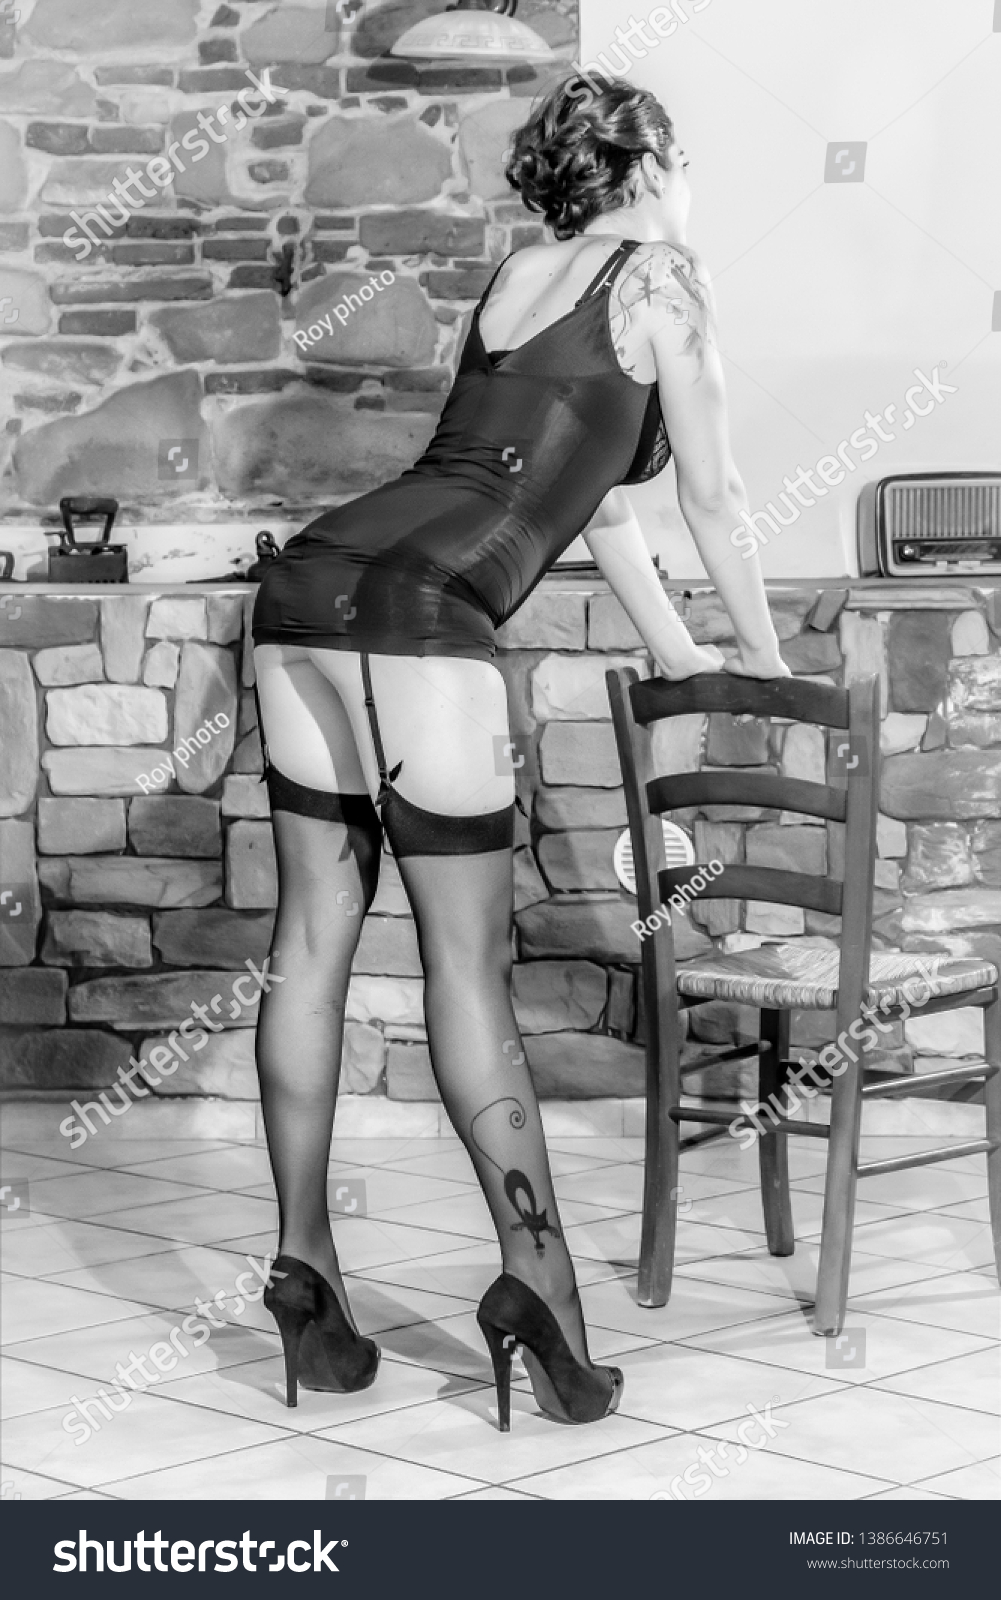 Vintage Stockings Archive